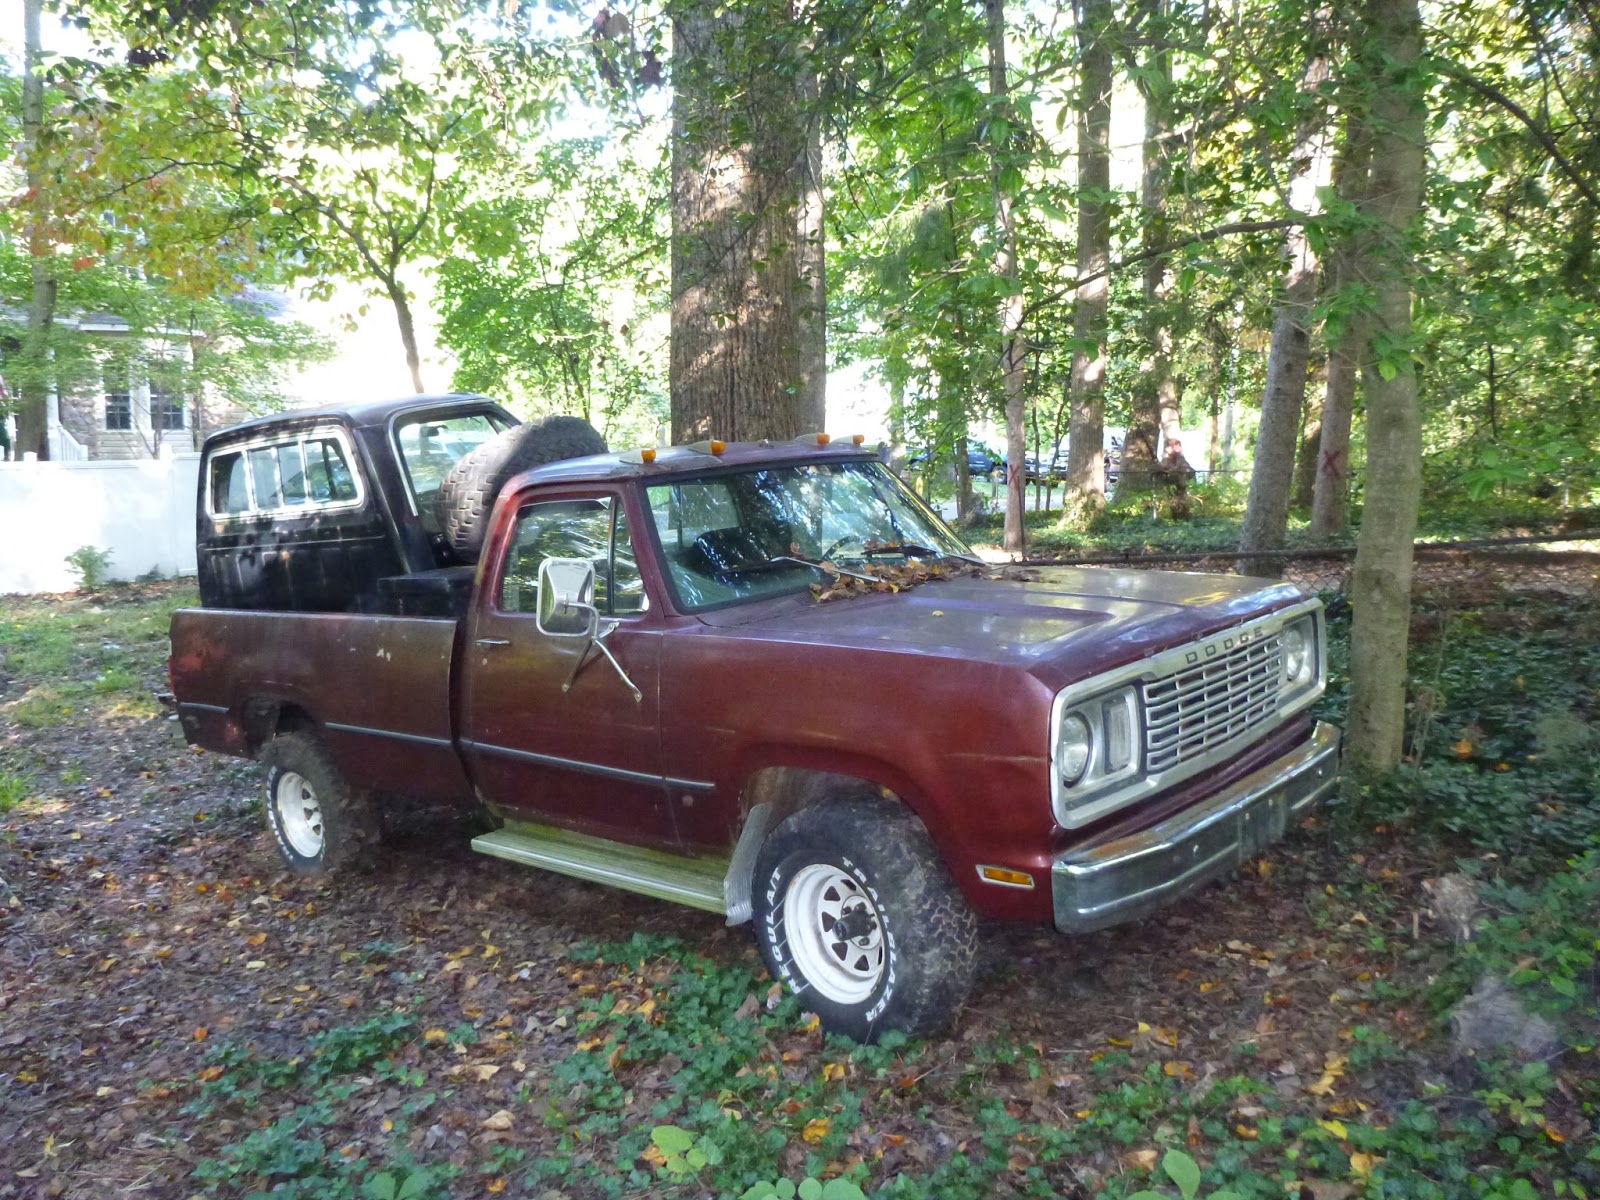 1978 Dodge Club Cab Resto: The 78 Dodge Truck Project begains